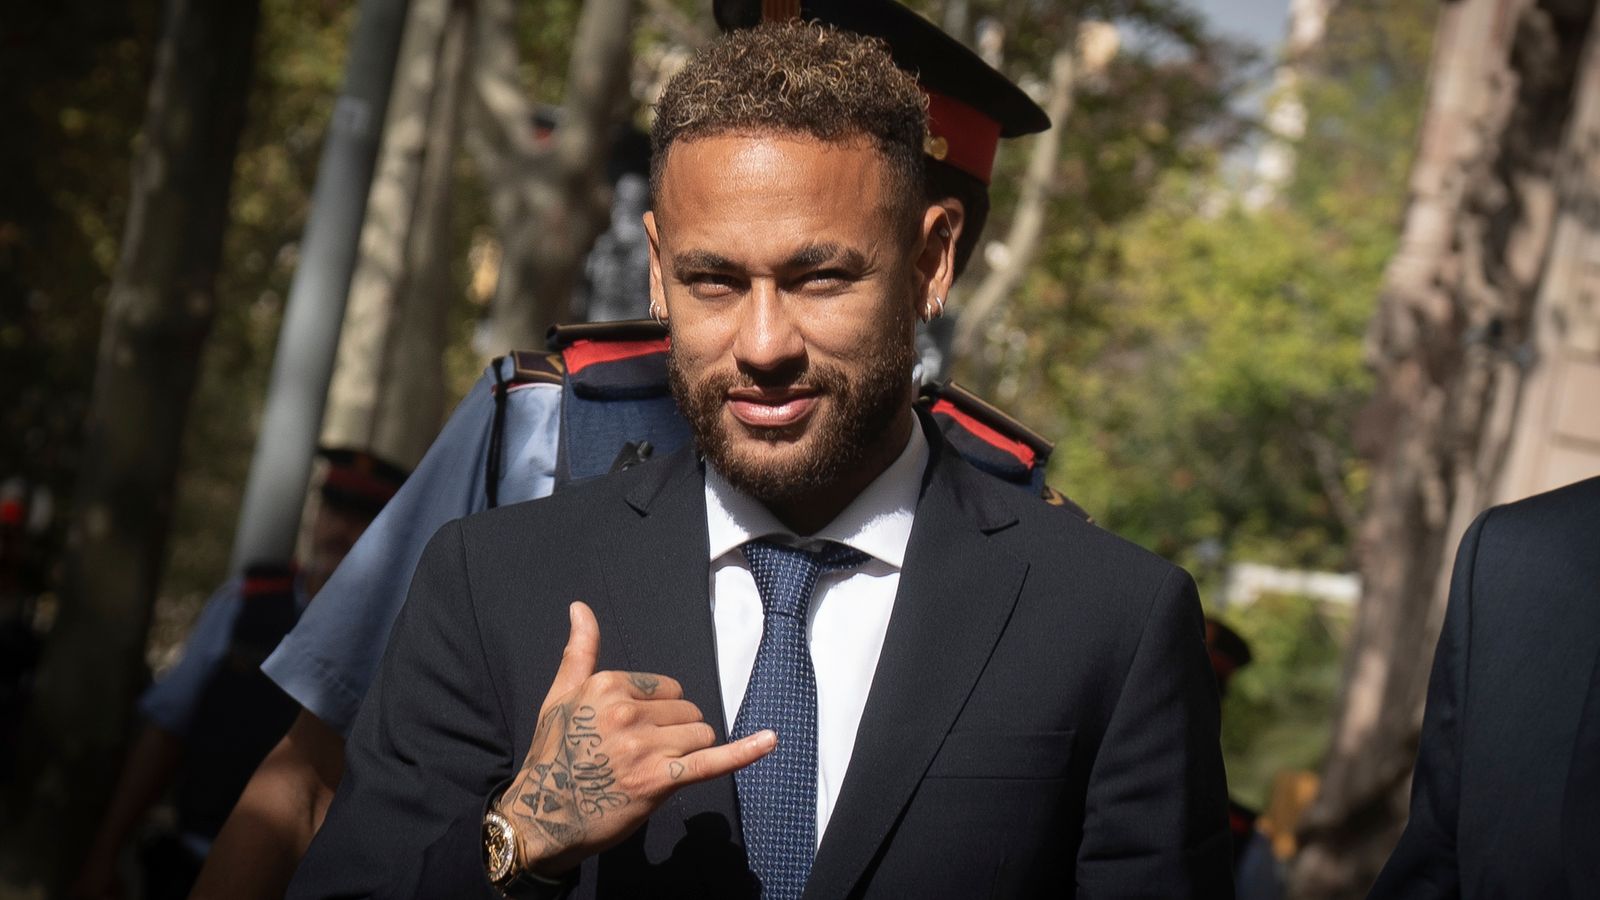 neymar-paris-saint-germain-forward-on-alleged-corruption-charges-i-did-not-participate-in-barcelona-transfer-talks